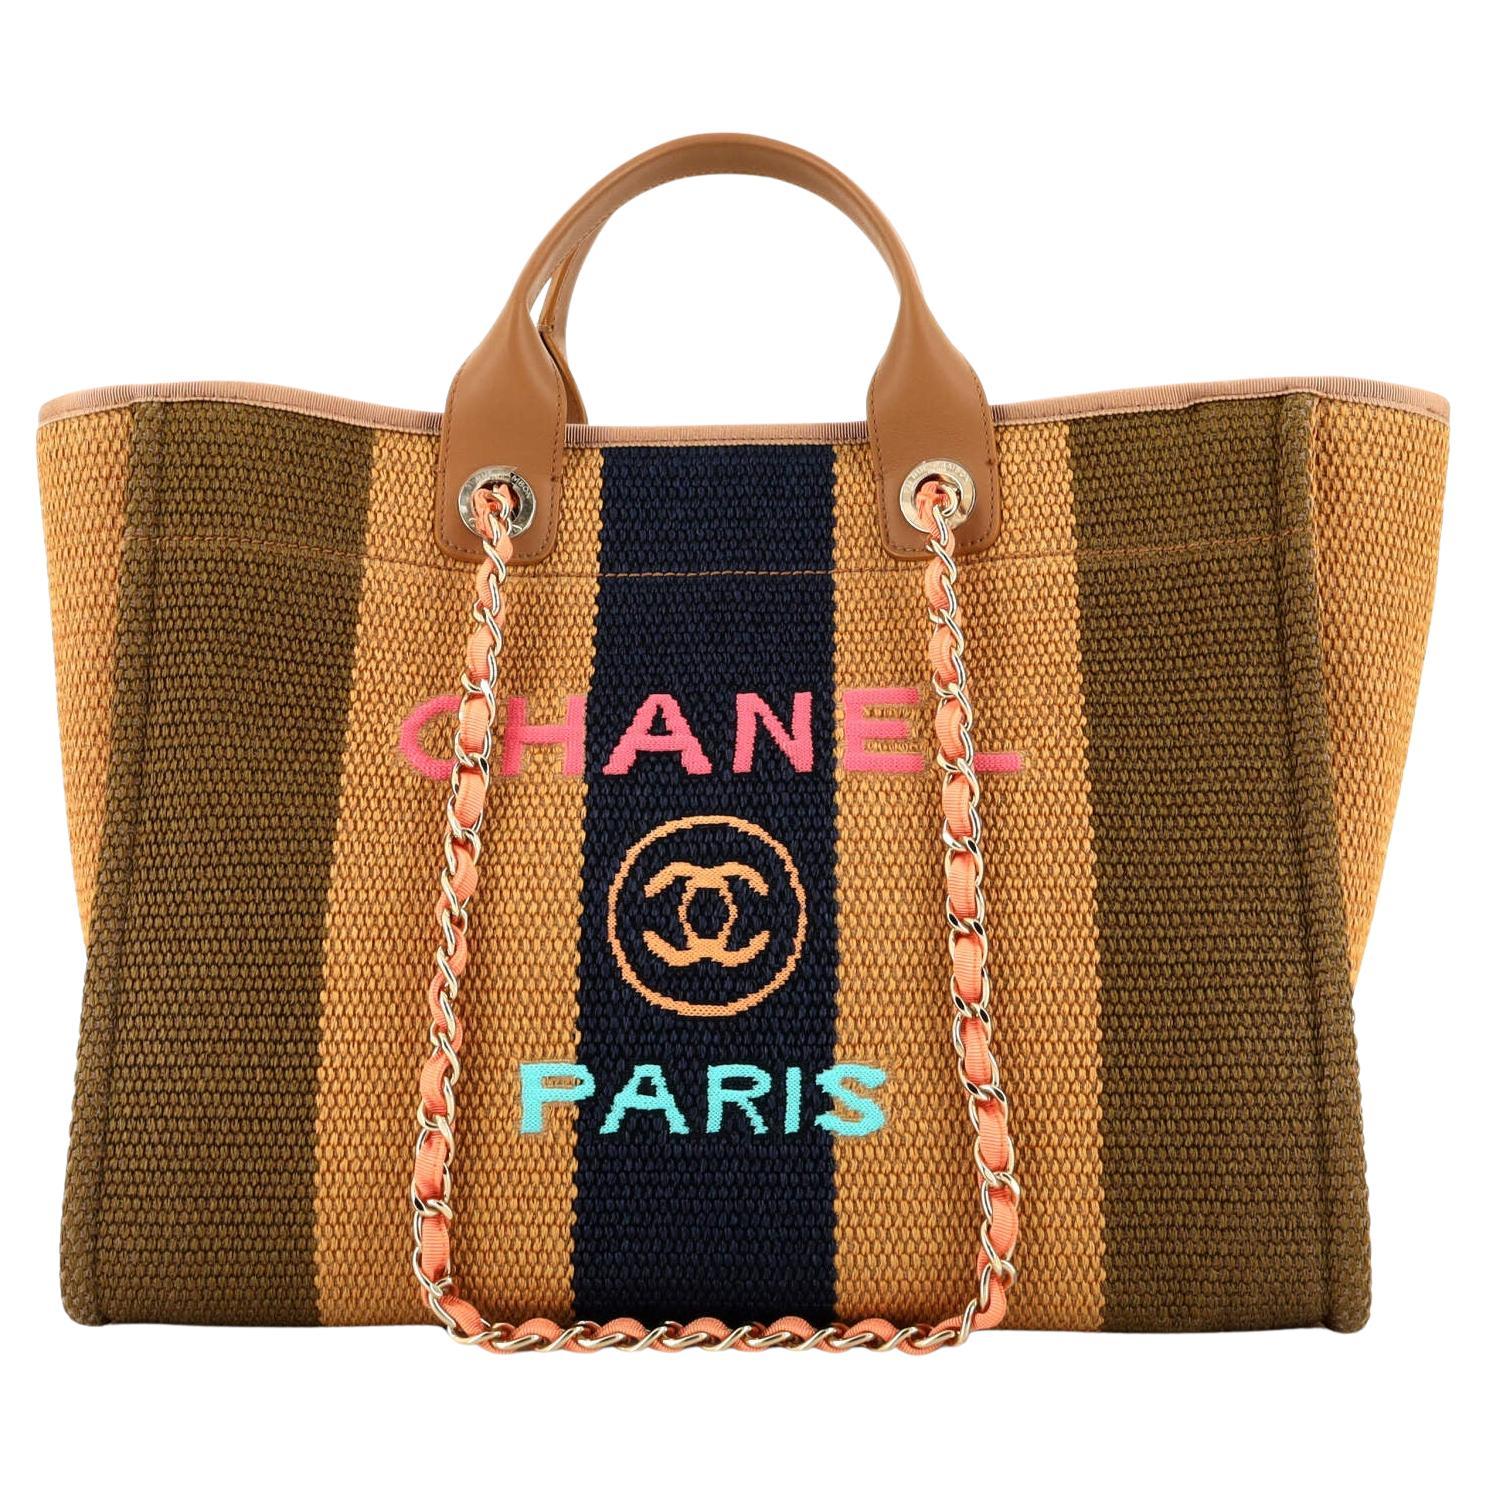 Chanel Canvas Tote - 130 For Sale on 1stDibs